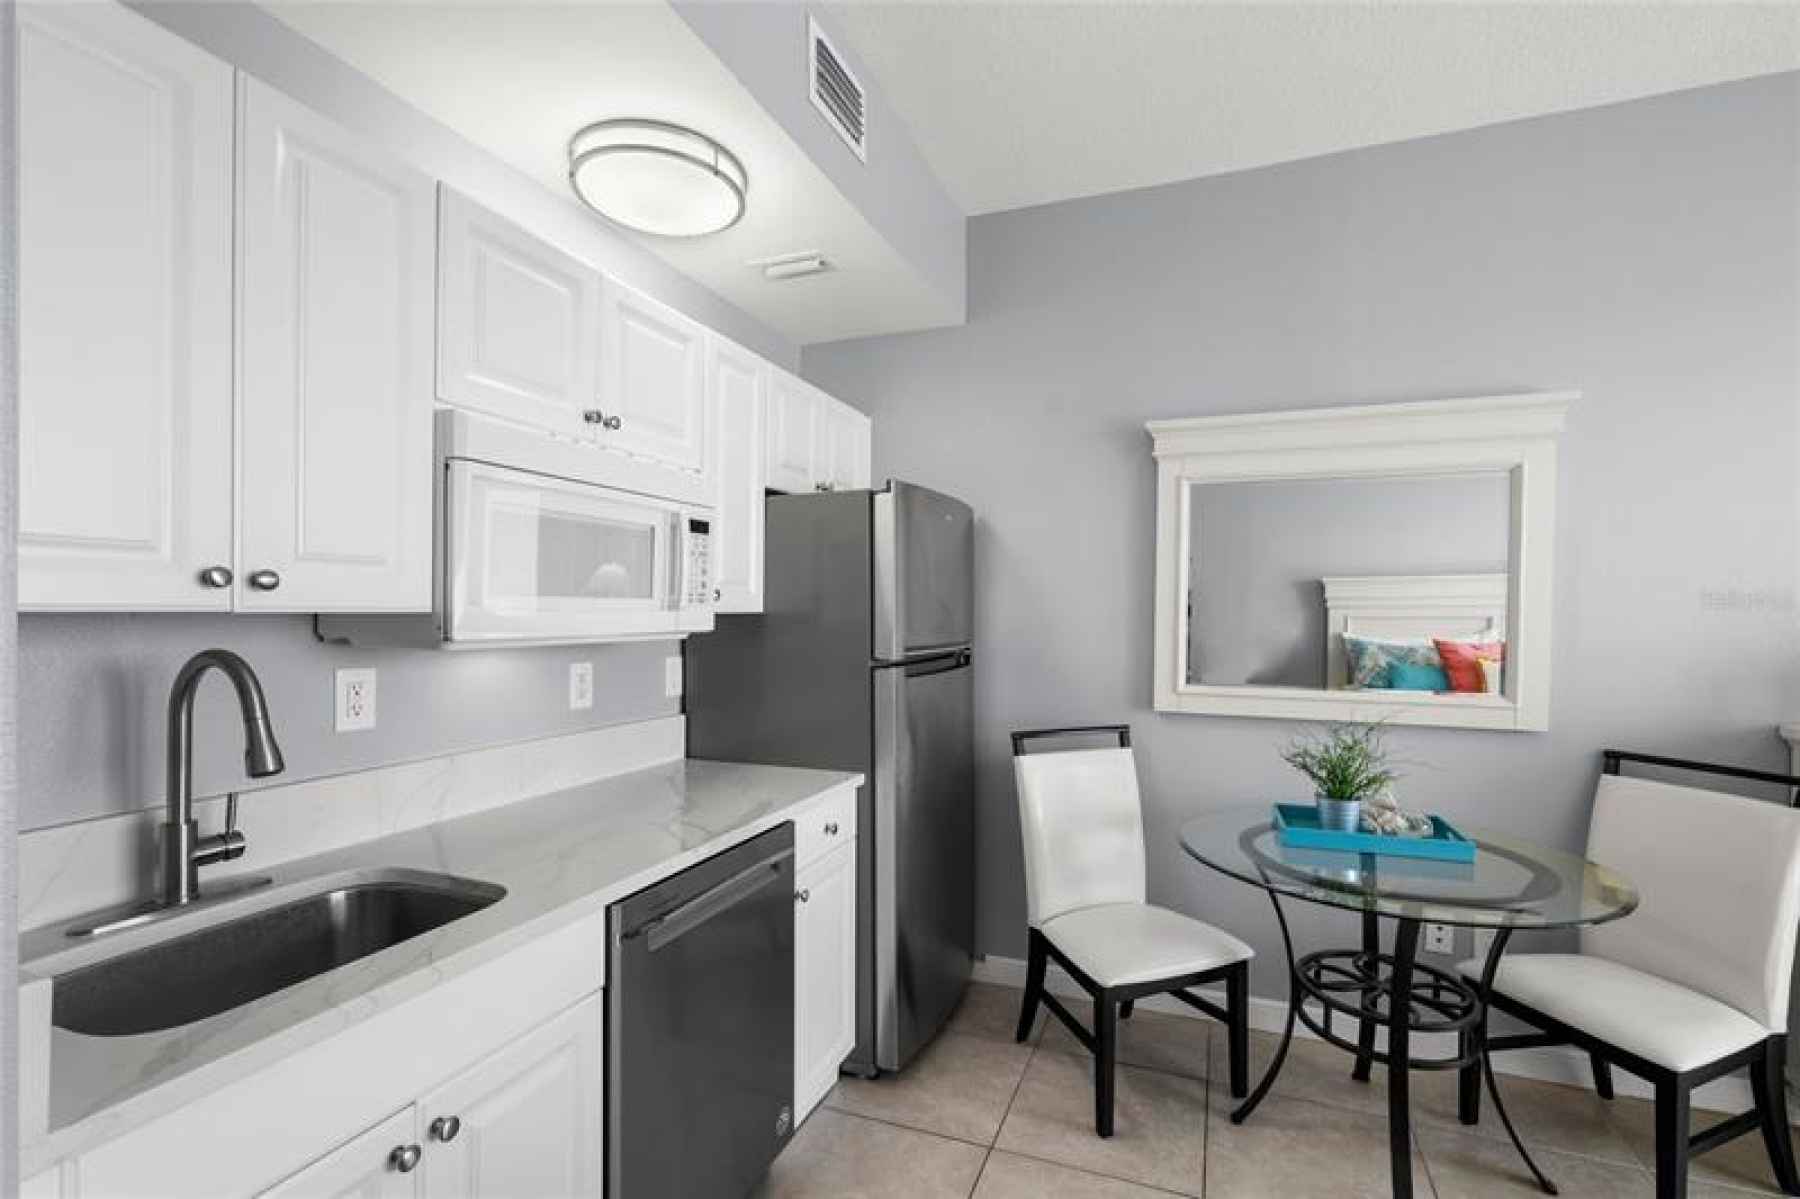 Hip-height counters, plenty of storage, stainless steel appliances & new quartz countertops.